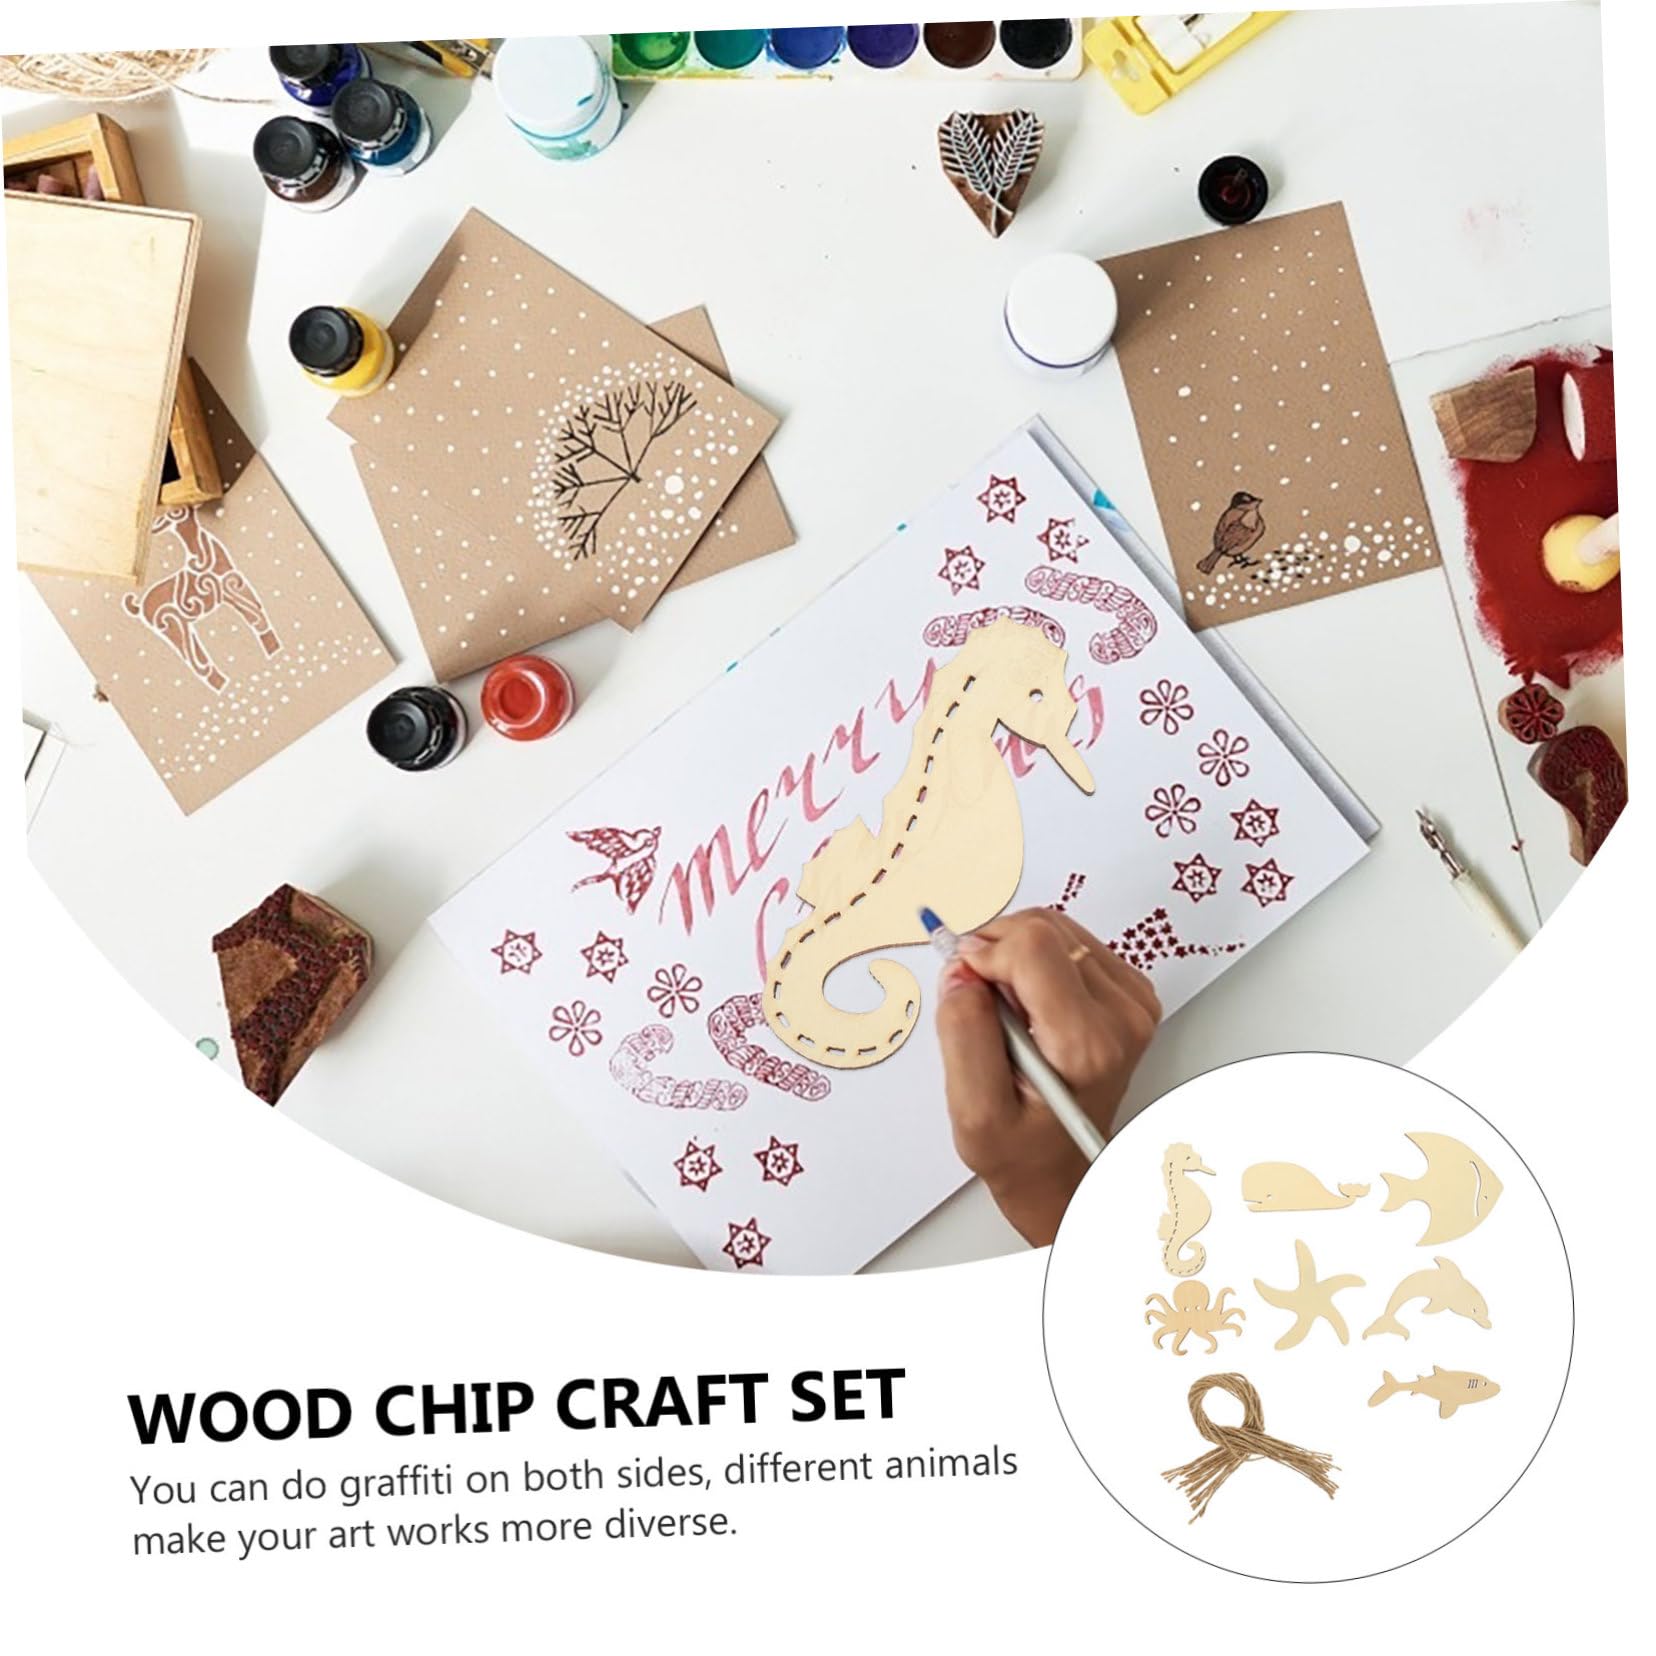 CIMAXIC 28pcs Ocean Cartoon Wood Chips Wood Paint for Crafts 3D Wooden  Ornaments to Paint Crafts for sea Animals Mini Decor Wood Slice Art Craft  Wood